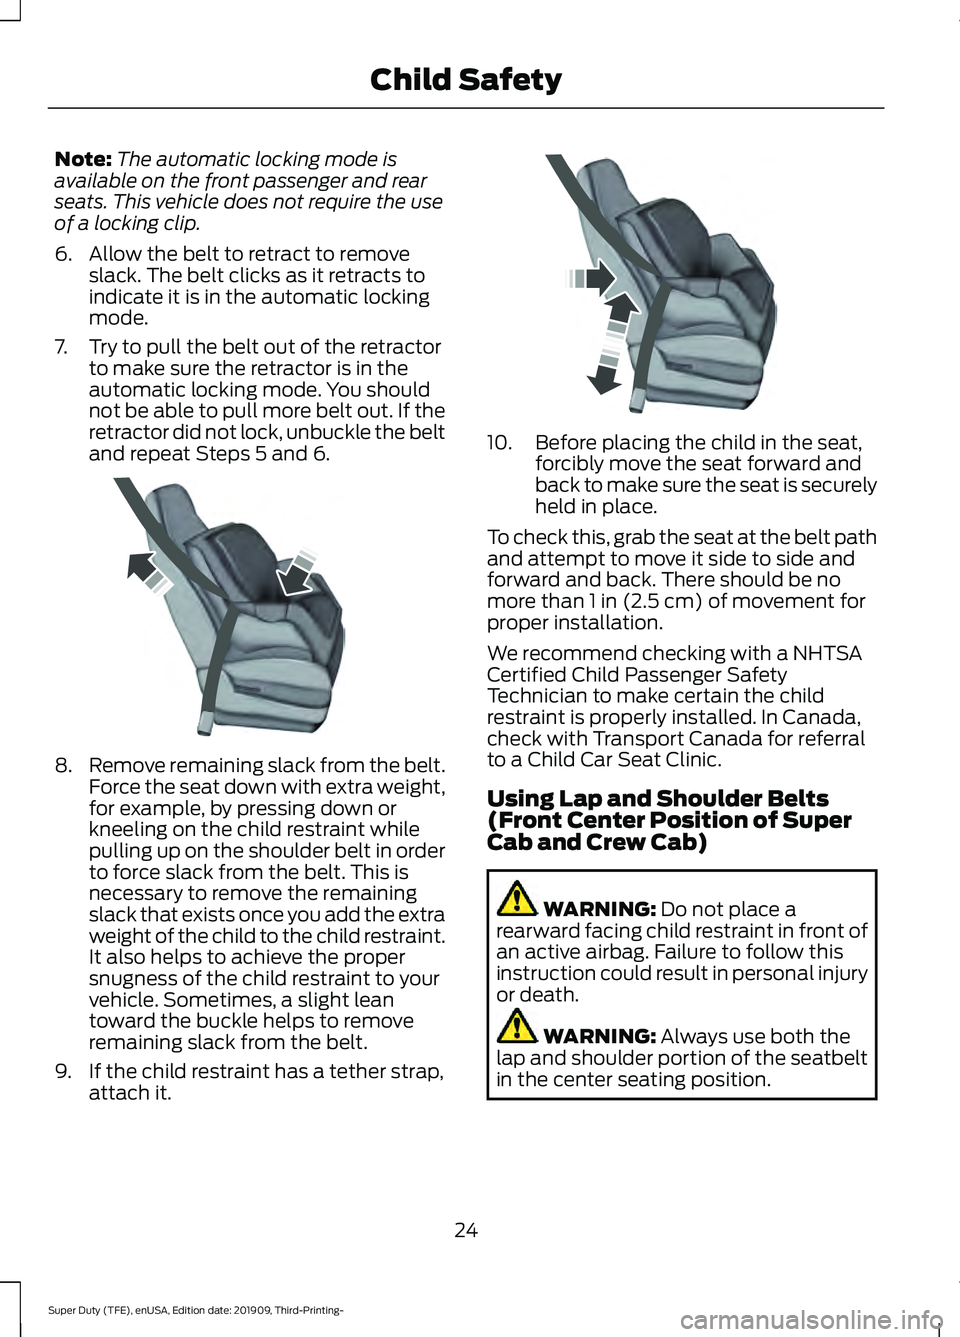 FORD F-350 2020  Owners Manual Note:
The automatic locking mode is
available on the front passenger and rear
seats. This vehicle does not require the use
of a locking clip.
6. Allow the belt to retract to remove slack. The belt cli